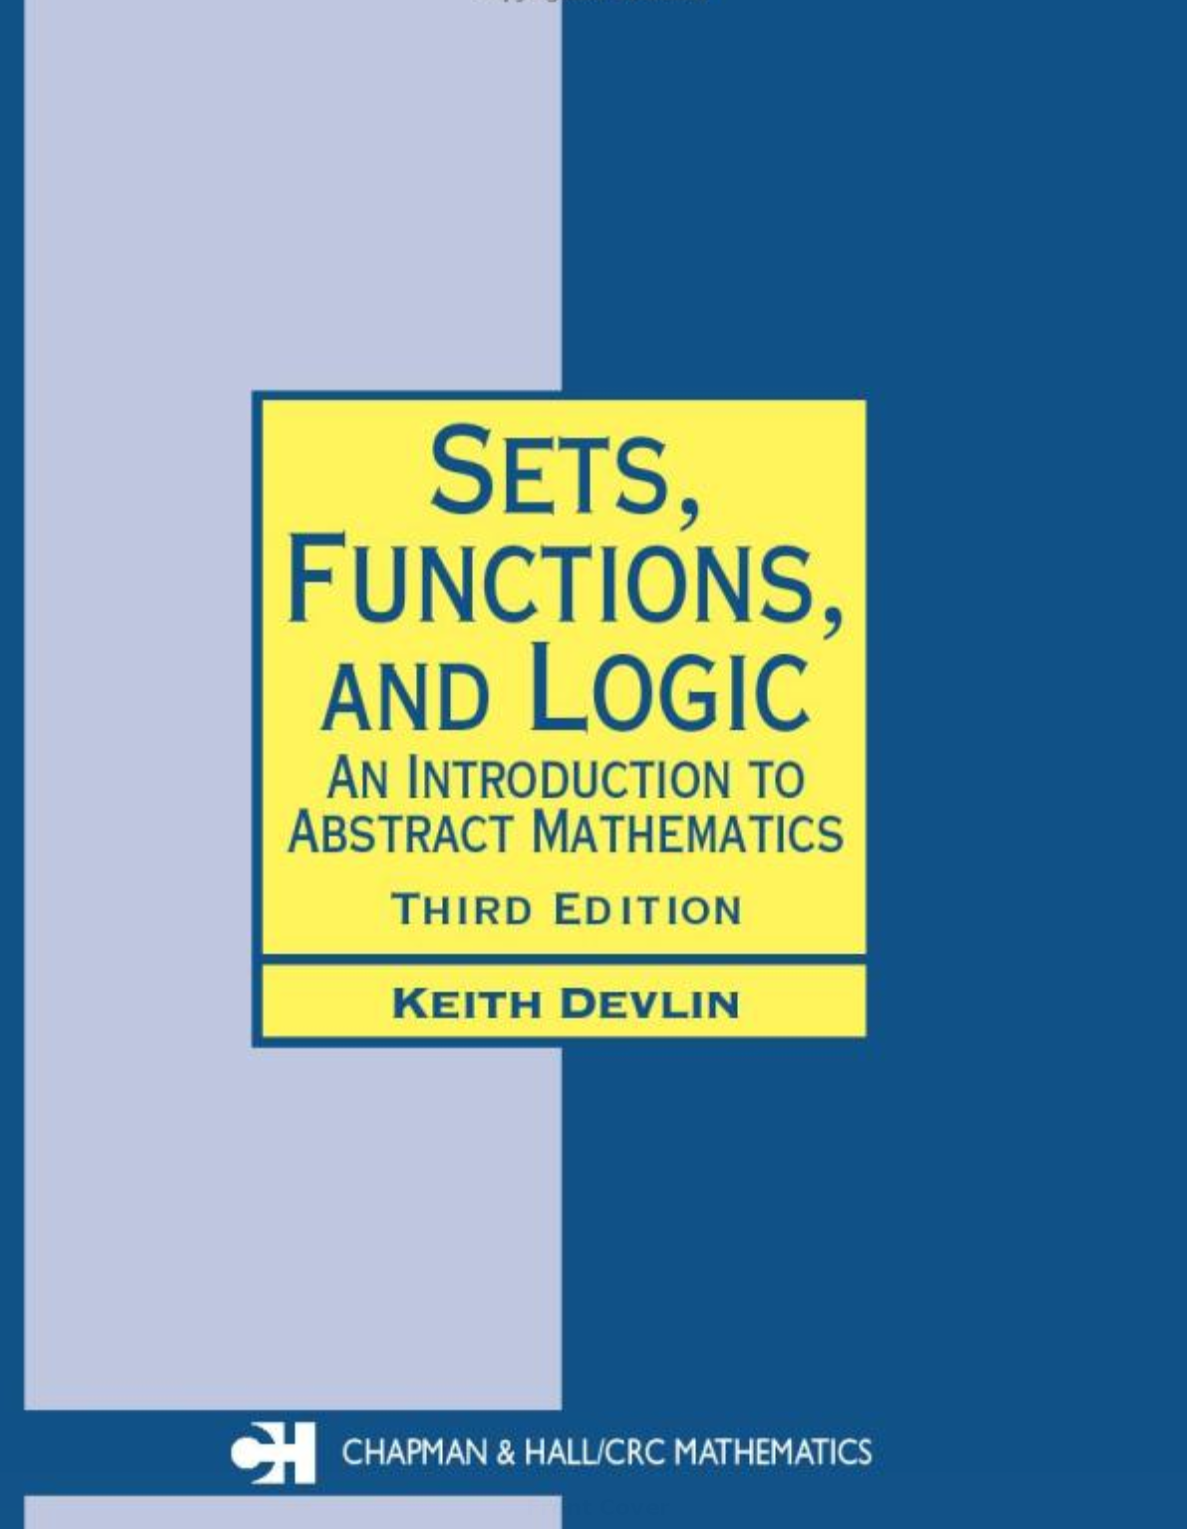 Sets, functions, and logic - an introduction to abstract mathematics (3rd Edition)